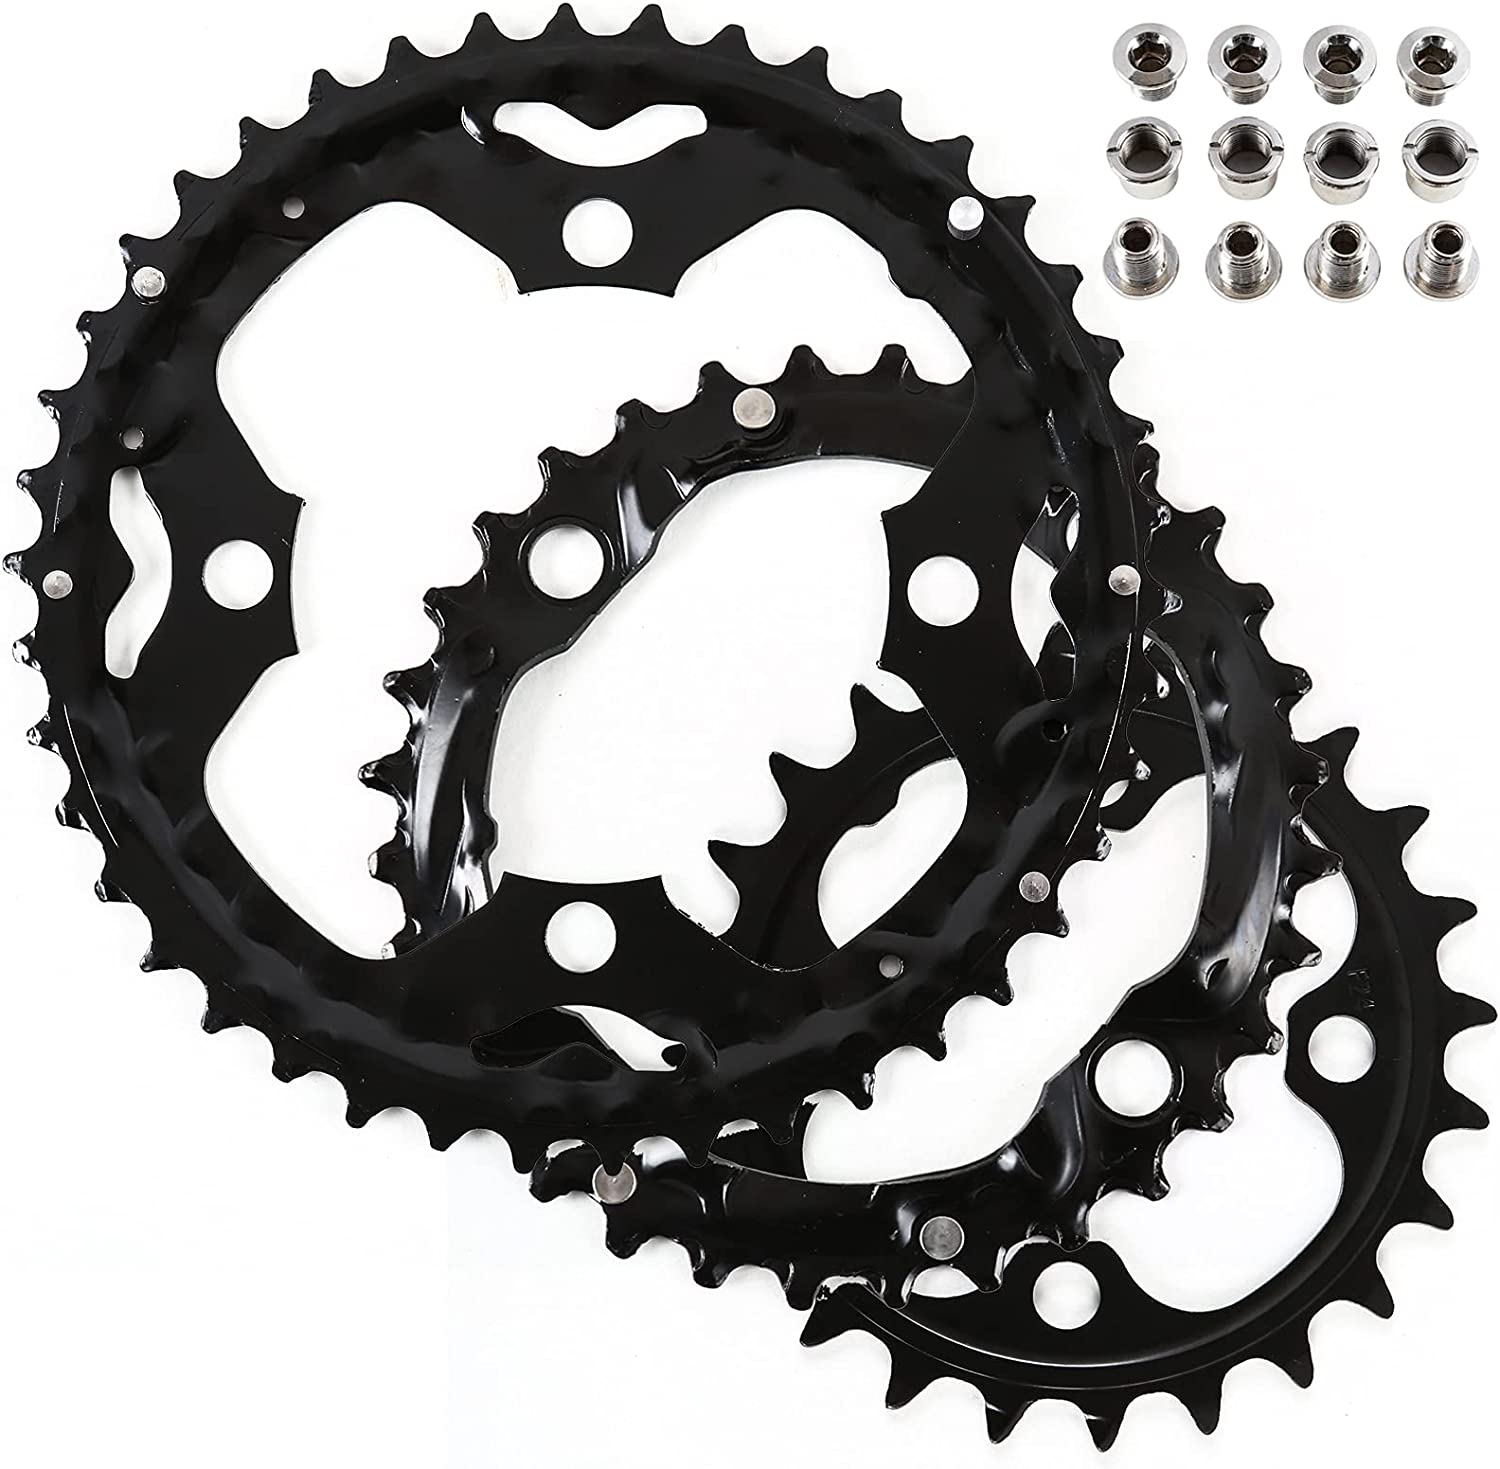 The number of teeth and the diameter are the indicators of the size of a chainring.